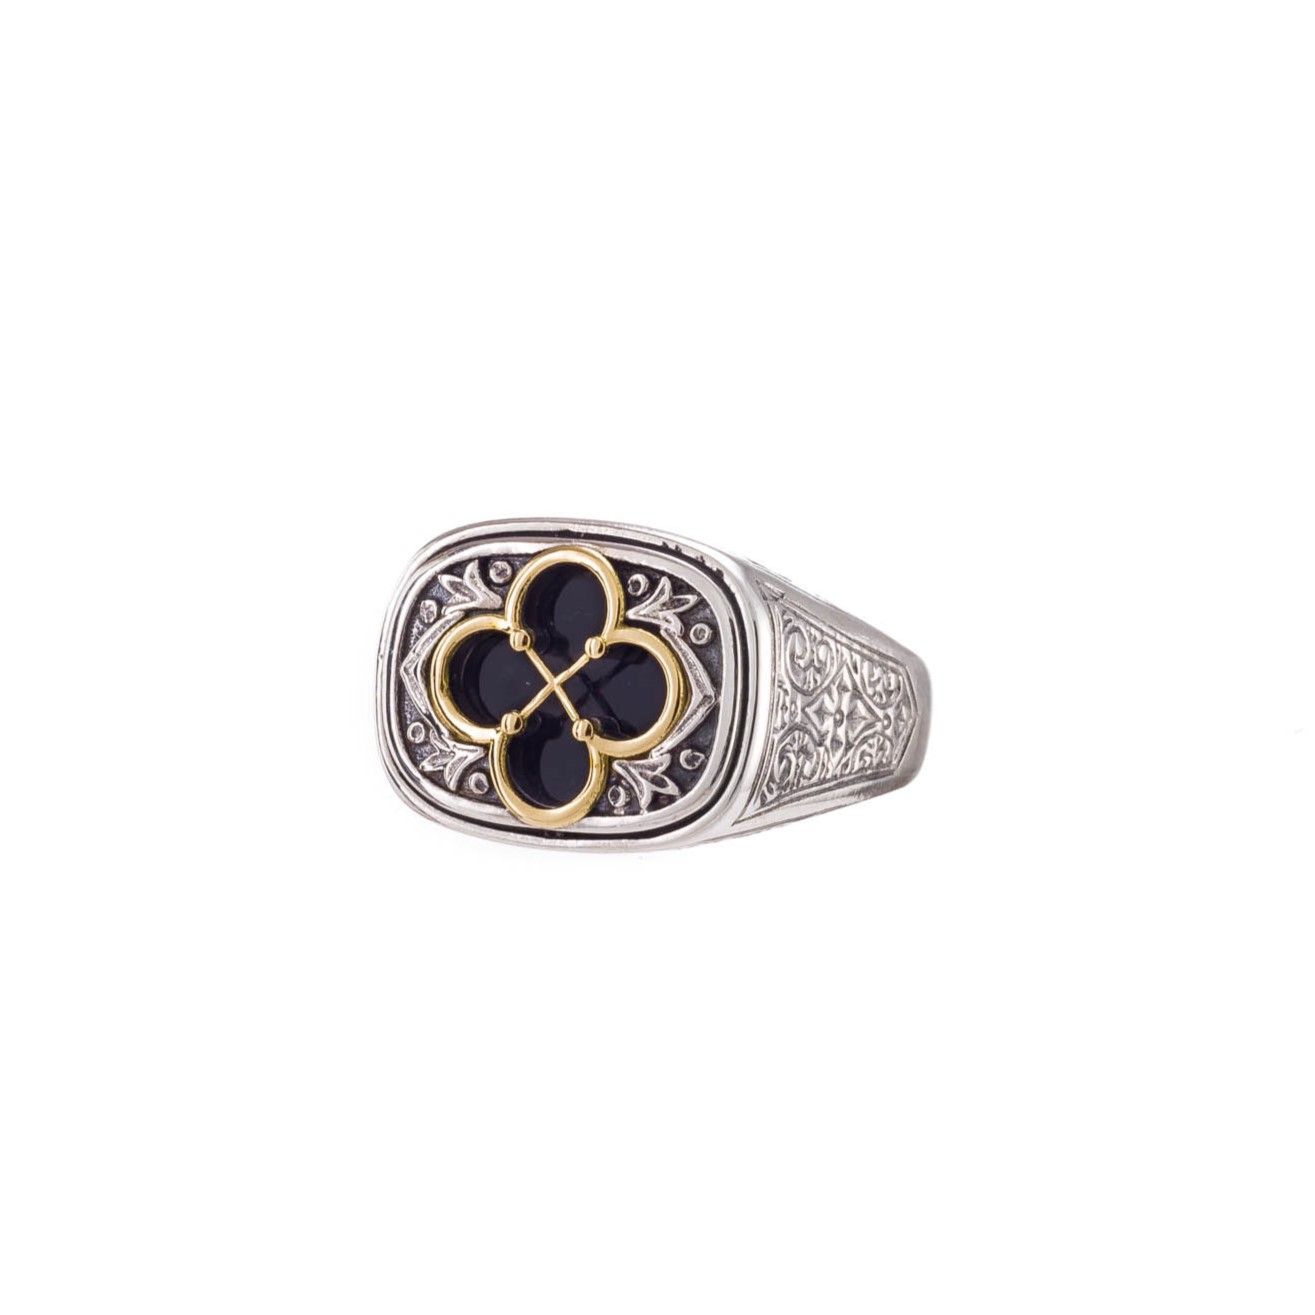 Odysseus Ring in 18K Gold and Sterling Silver with Black Onyx